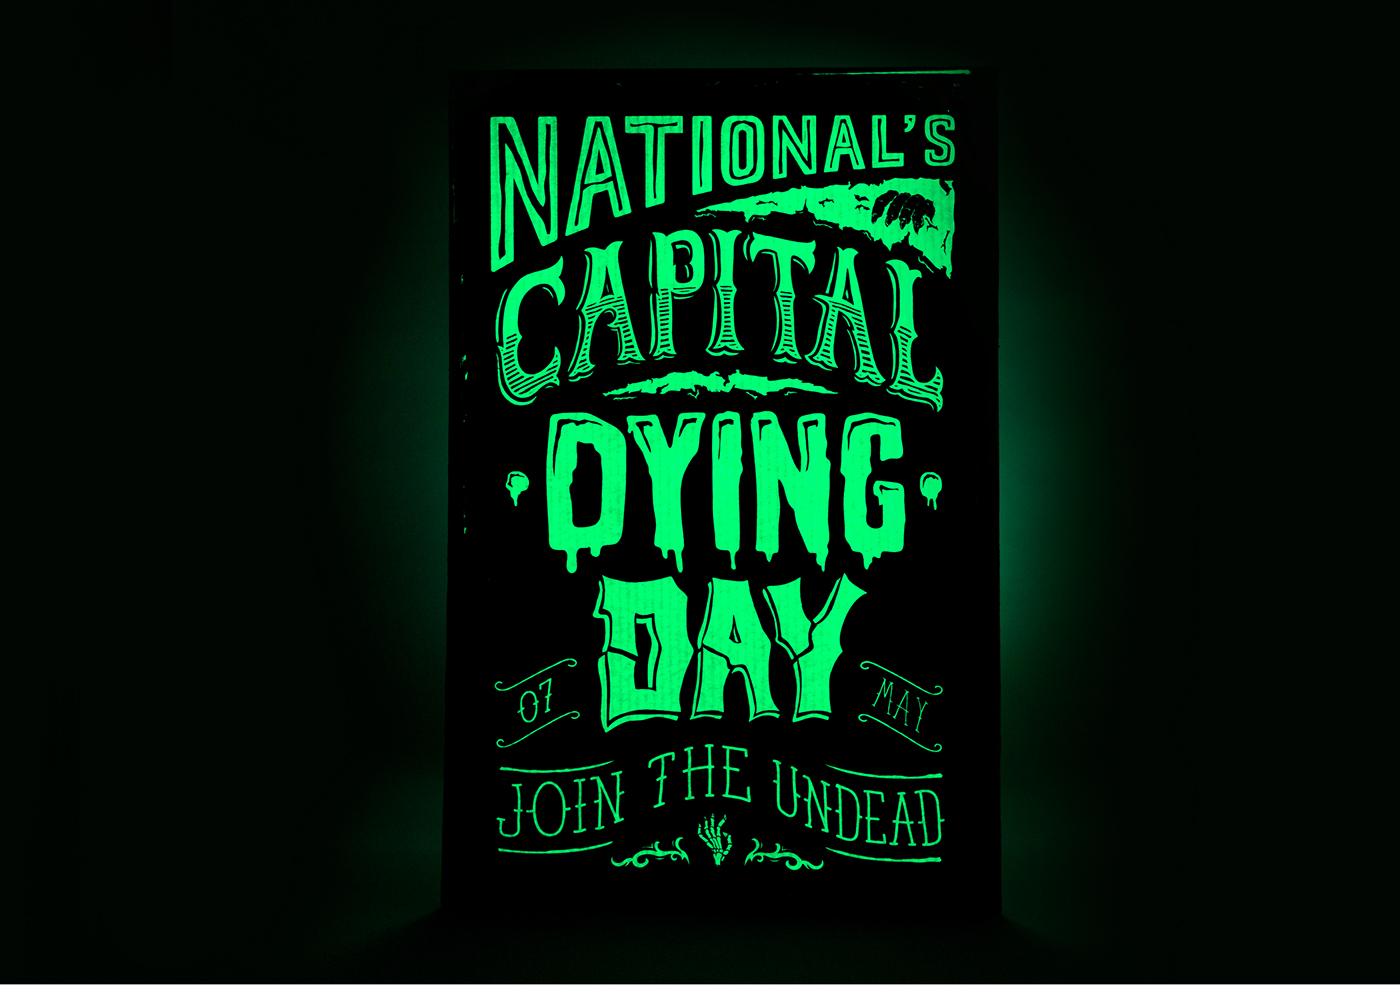 _Capital Dying Day